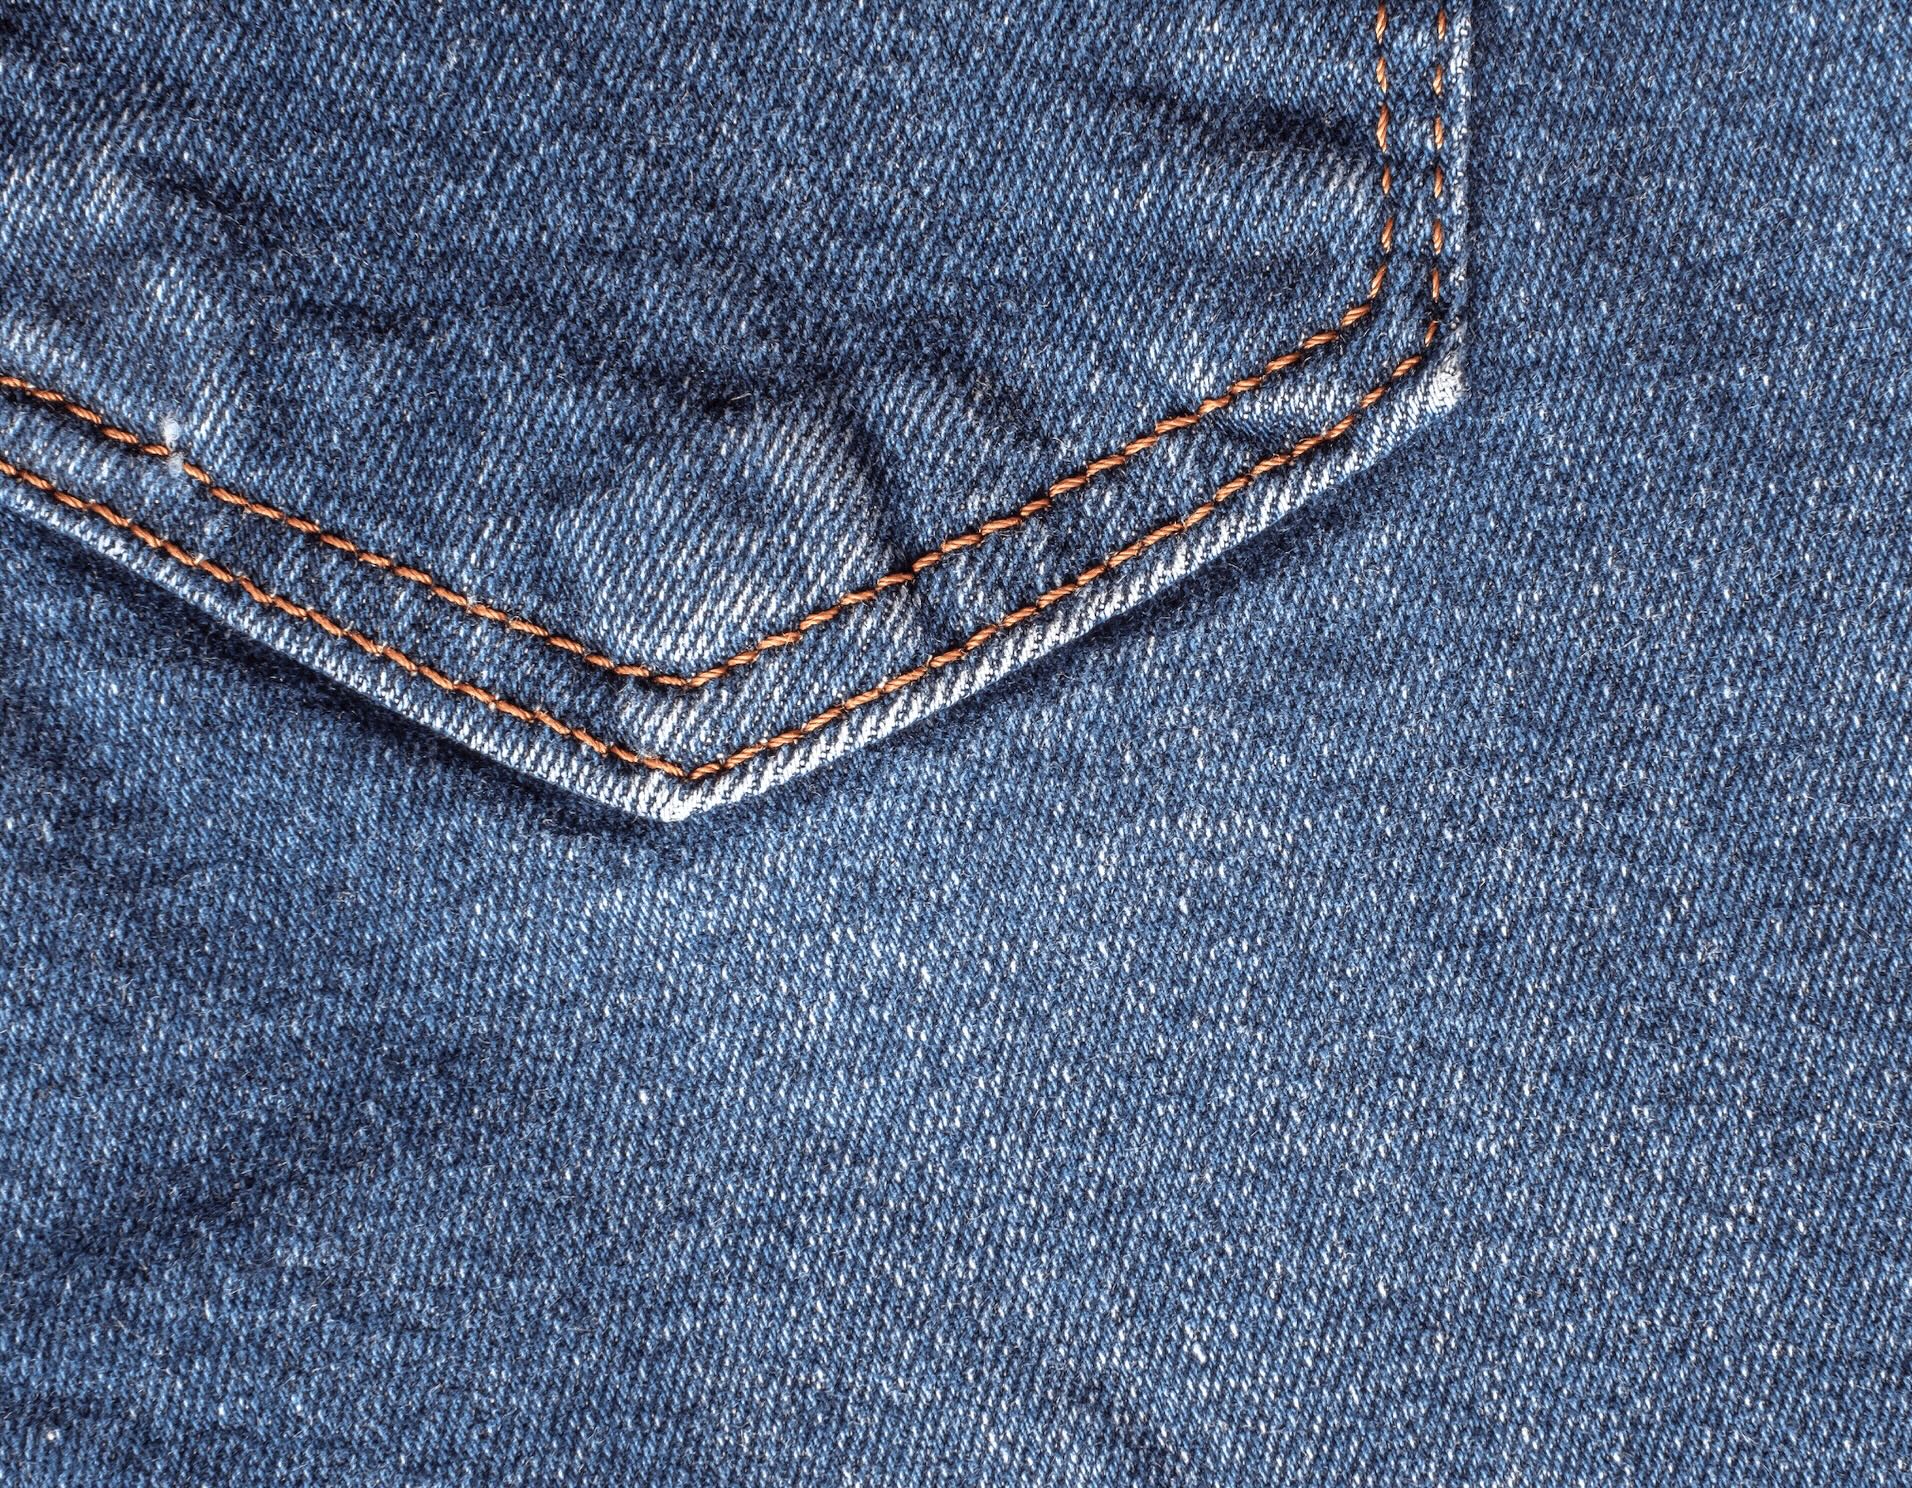 Denim Obsession: Build a Capsule Collection of Jeans You’ll Love!